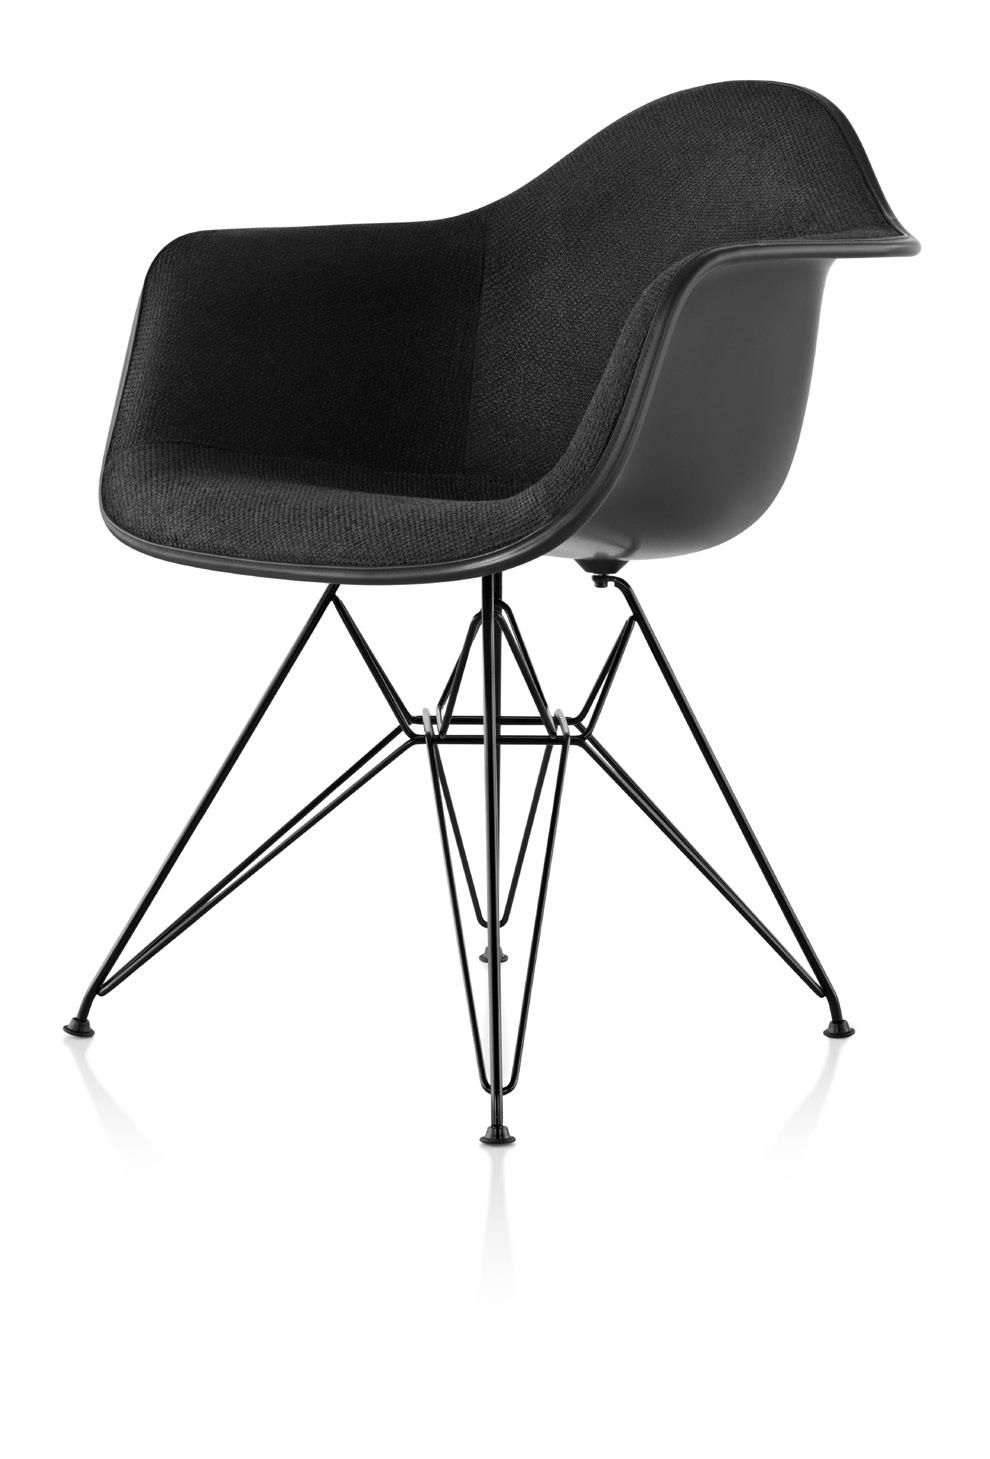 Eames Upholstered Molded Plastic Armchair Wire Base 14% recycled content; 85% recyclable Comfortable and lightweight, and updated with modern materials, the clean, simple form of Charles and Ray